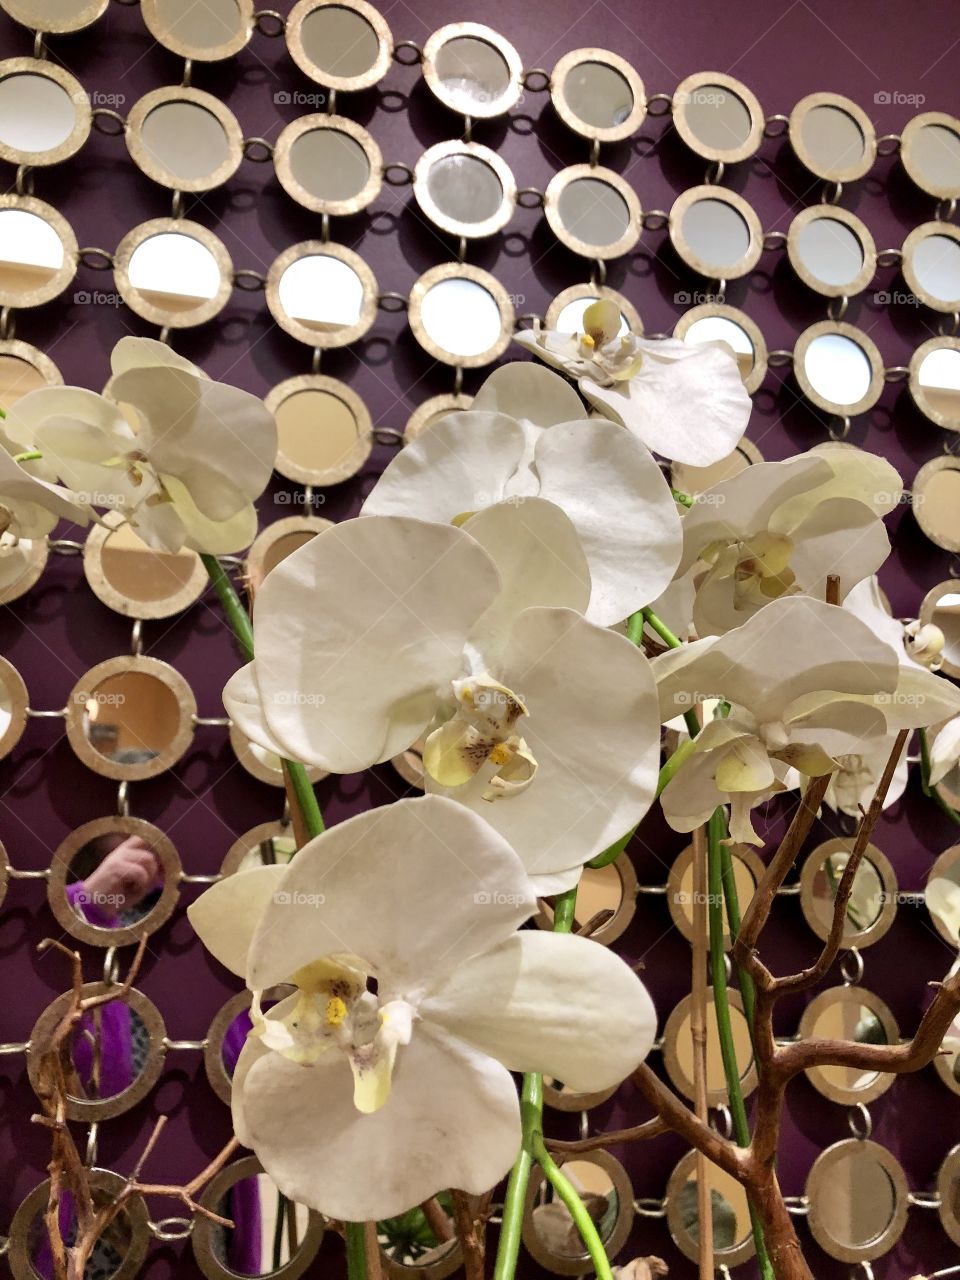 Close up of white orchids in front of plum wall with mirrored circles.